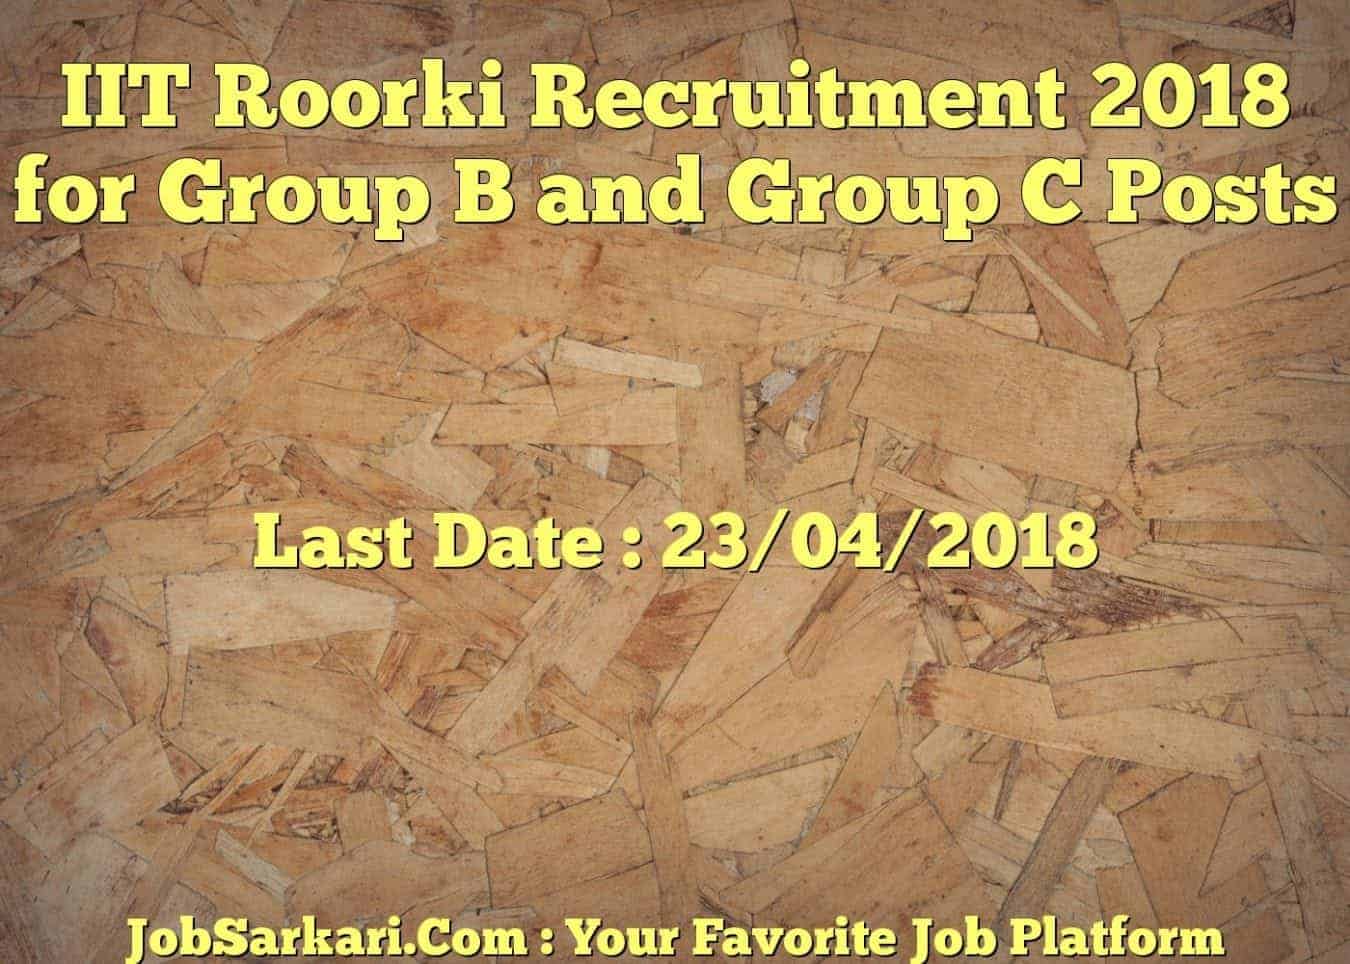 IIT Roorki Recruitment 2018 for Group B and Group C Posts